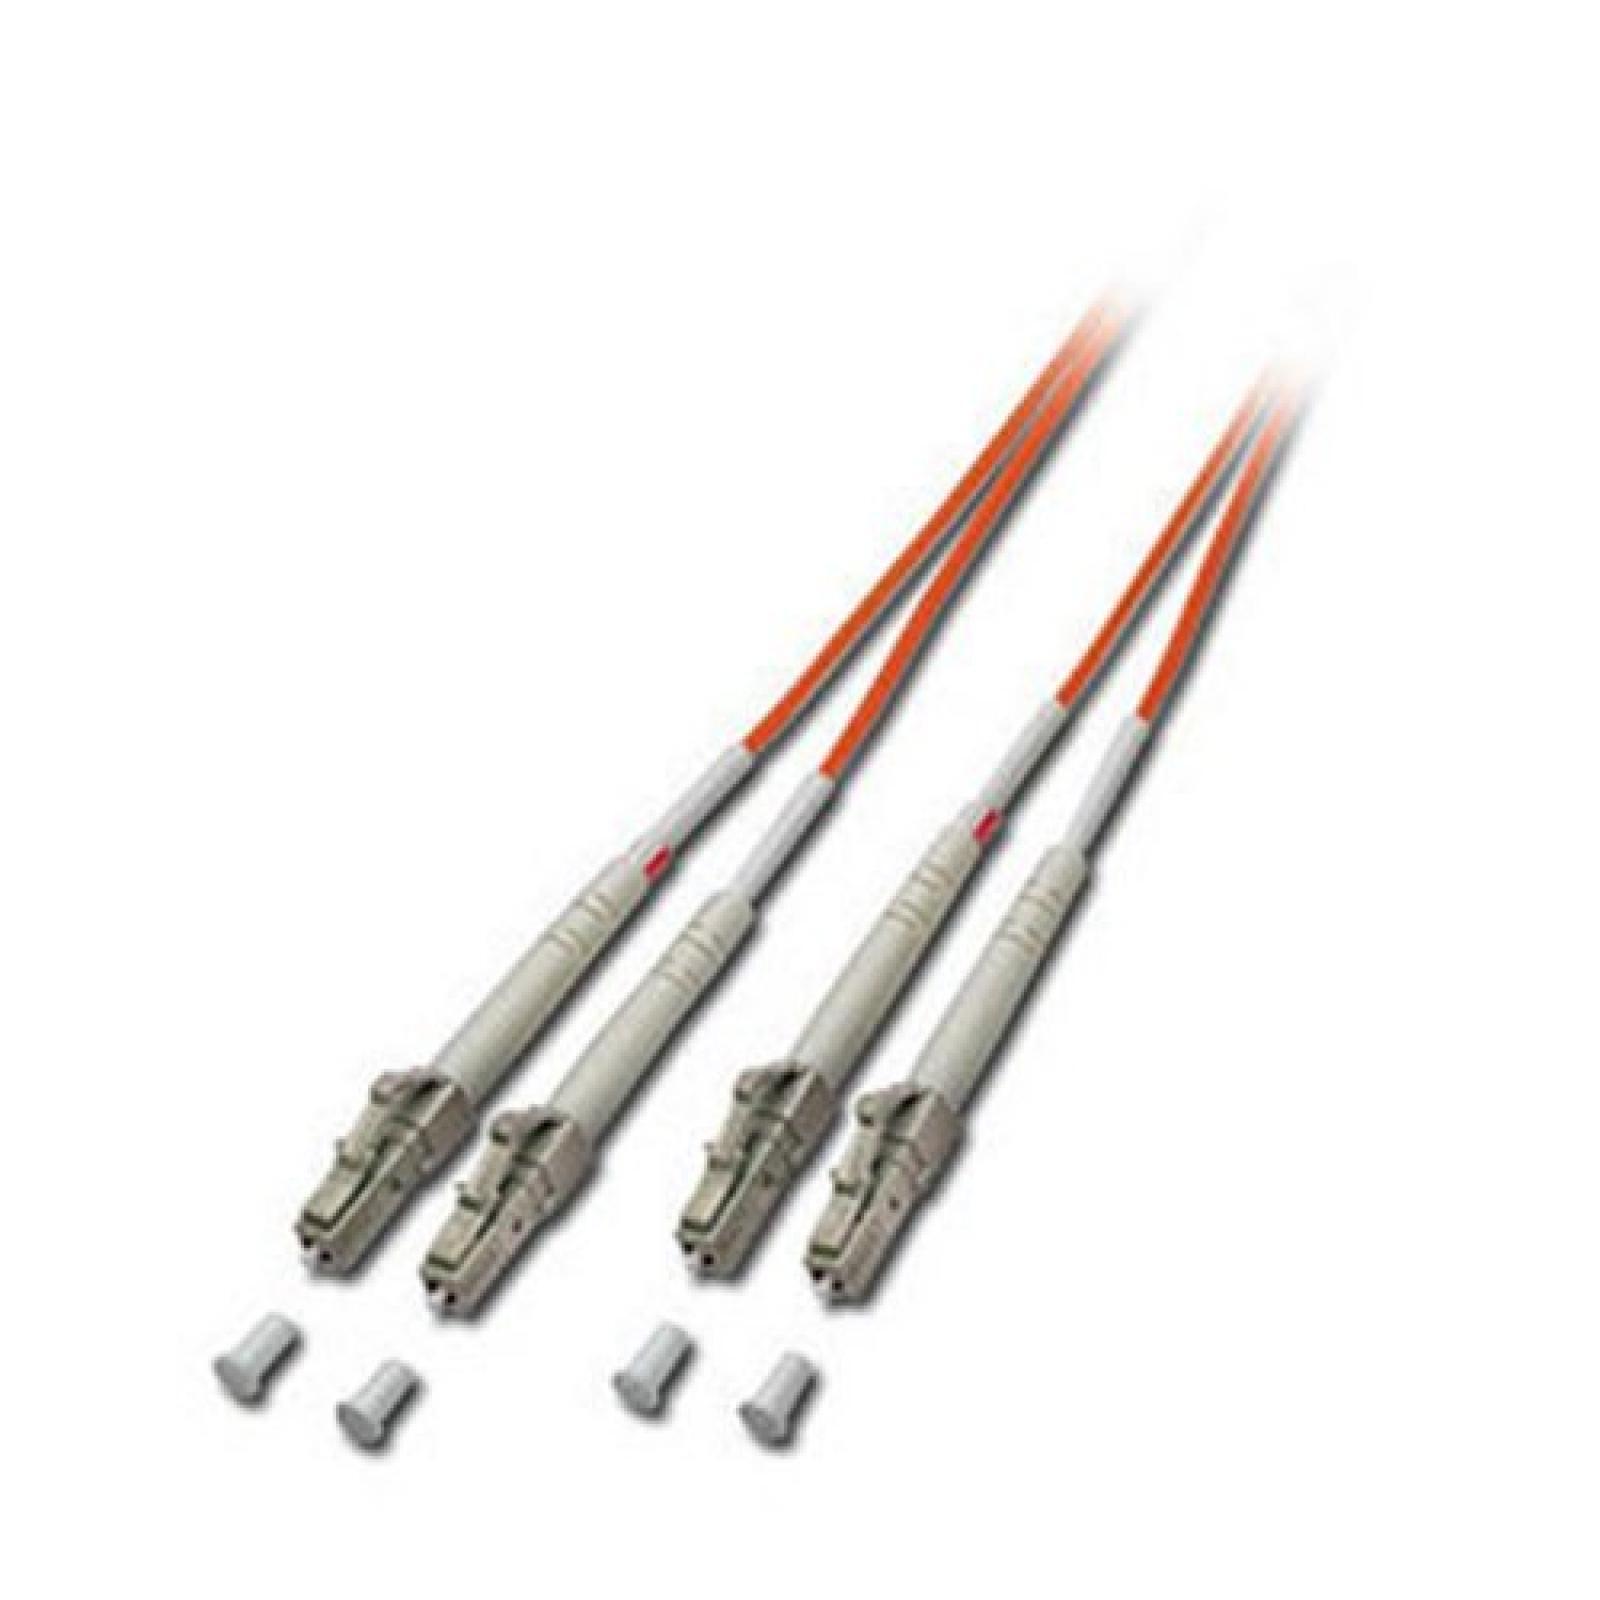 LINDY 15 Meter LC to LC 62.5/125 Fiber Optic Cable (46242)